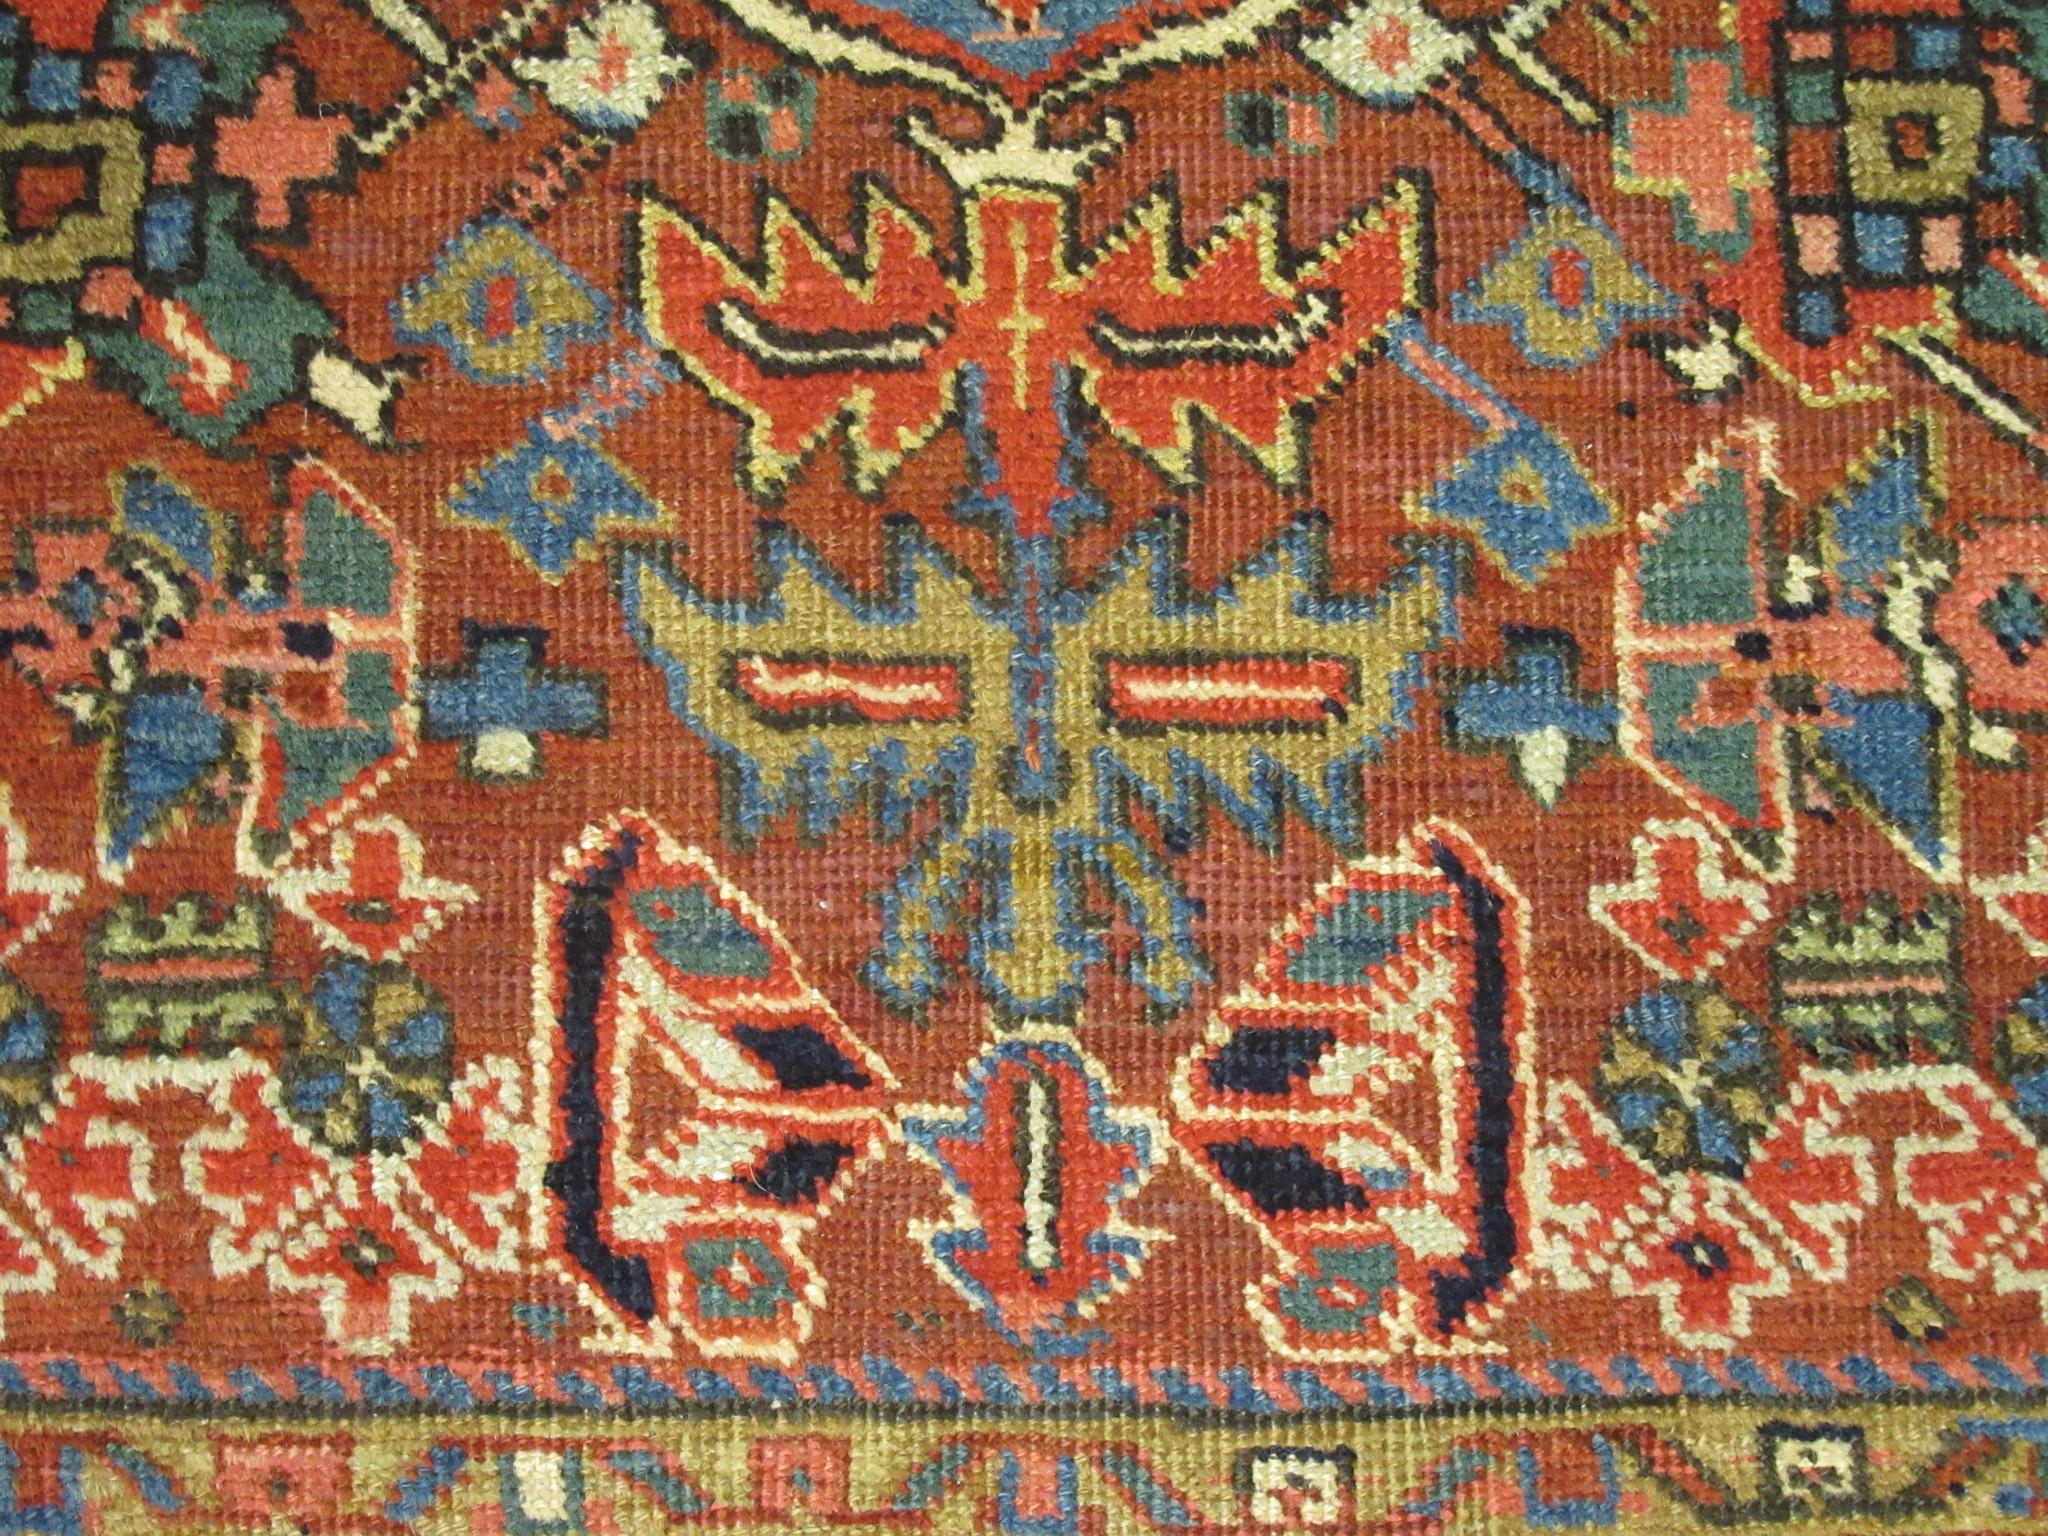 20th Century Small Antique Hand-Knotted Wool Persian Heriz Rug